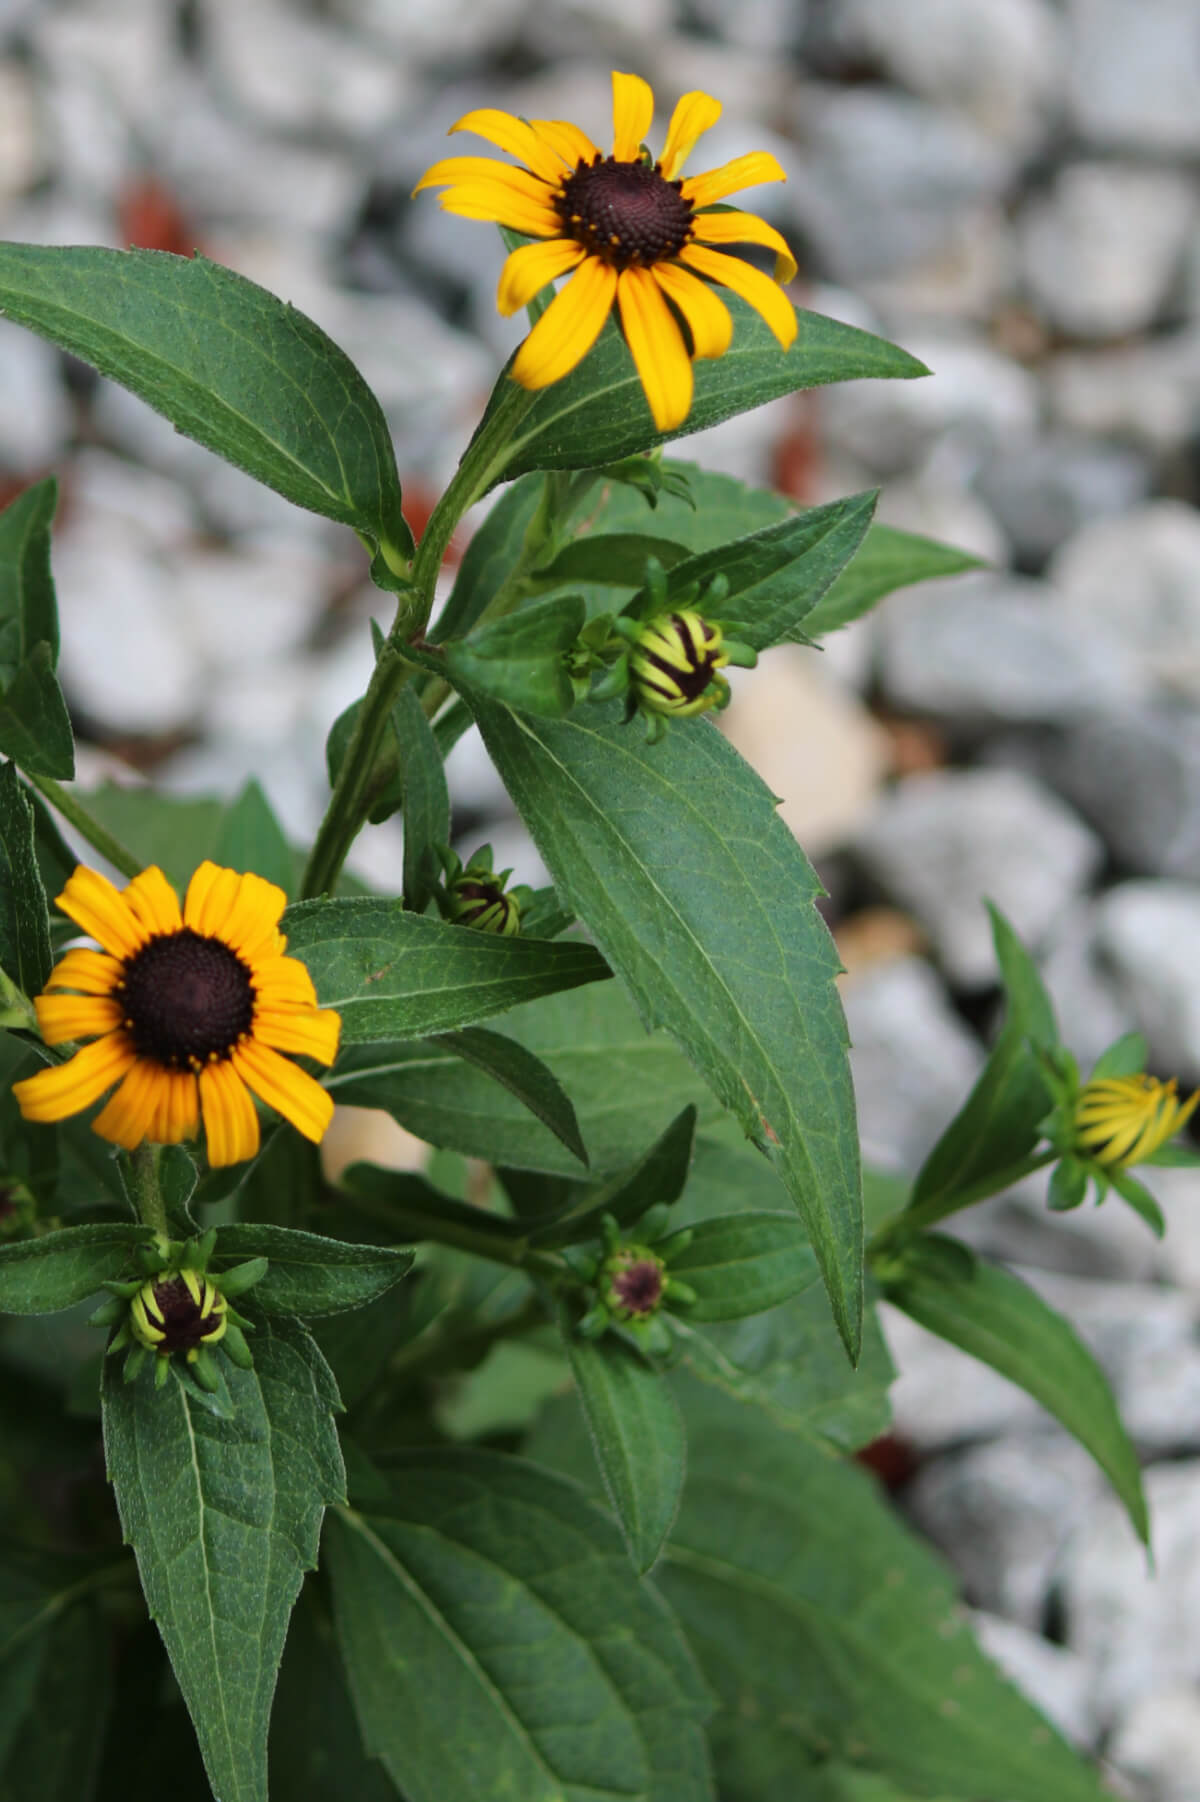 As you can see, my mystery plant turned out to be a Black-Eyed Susan plant.